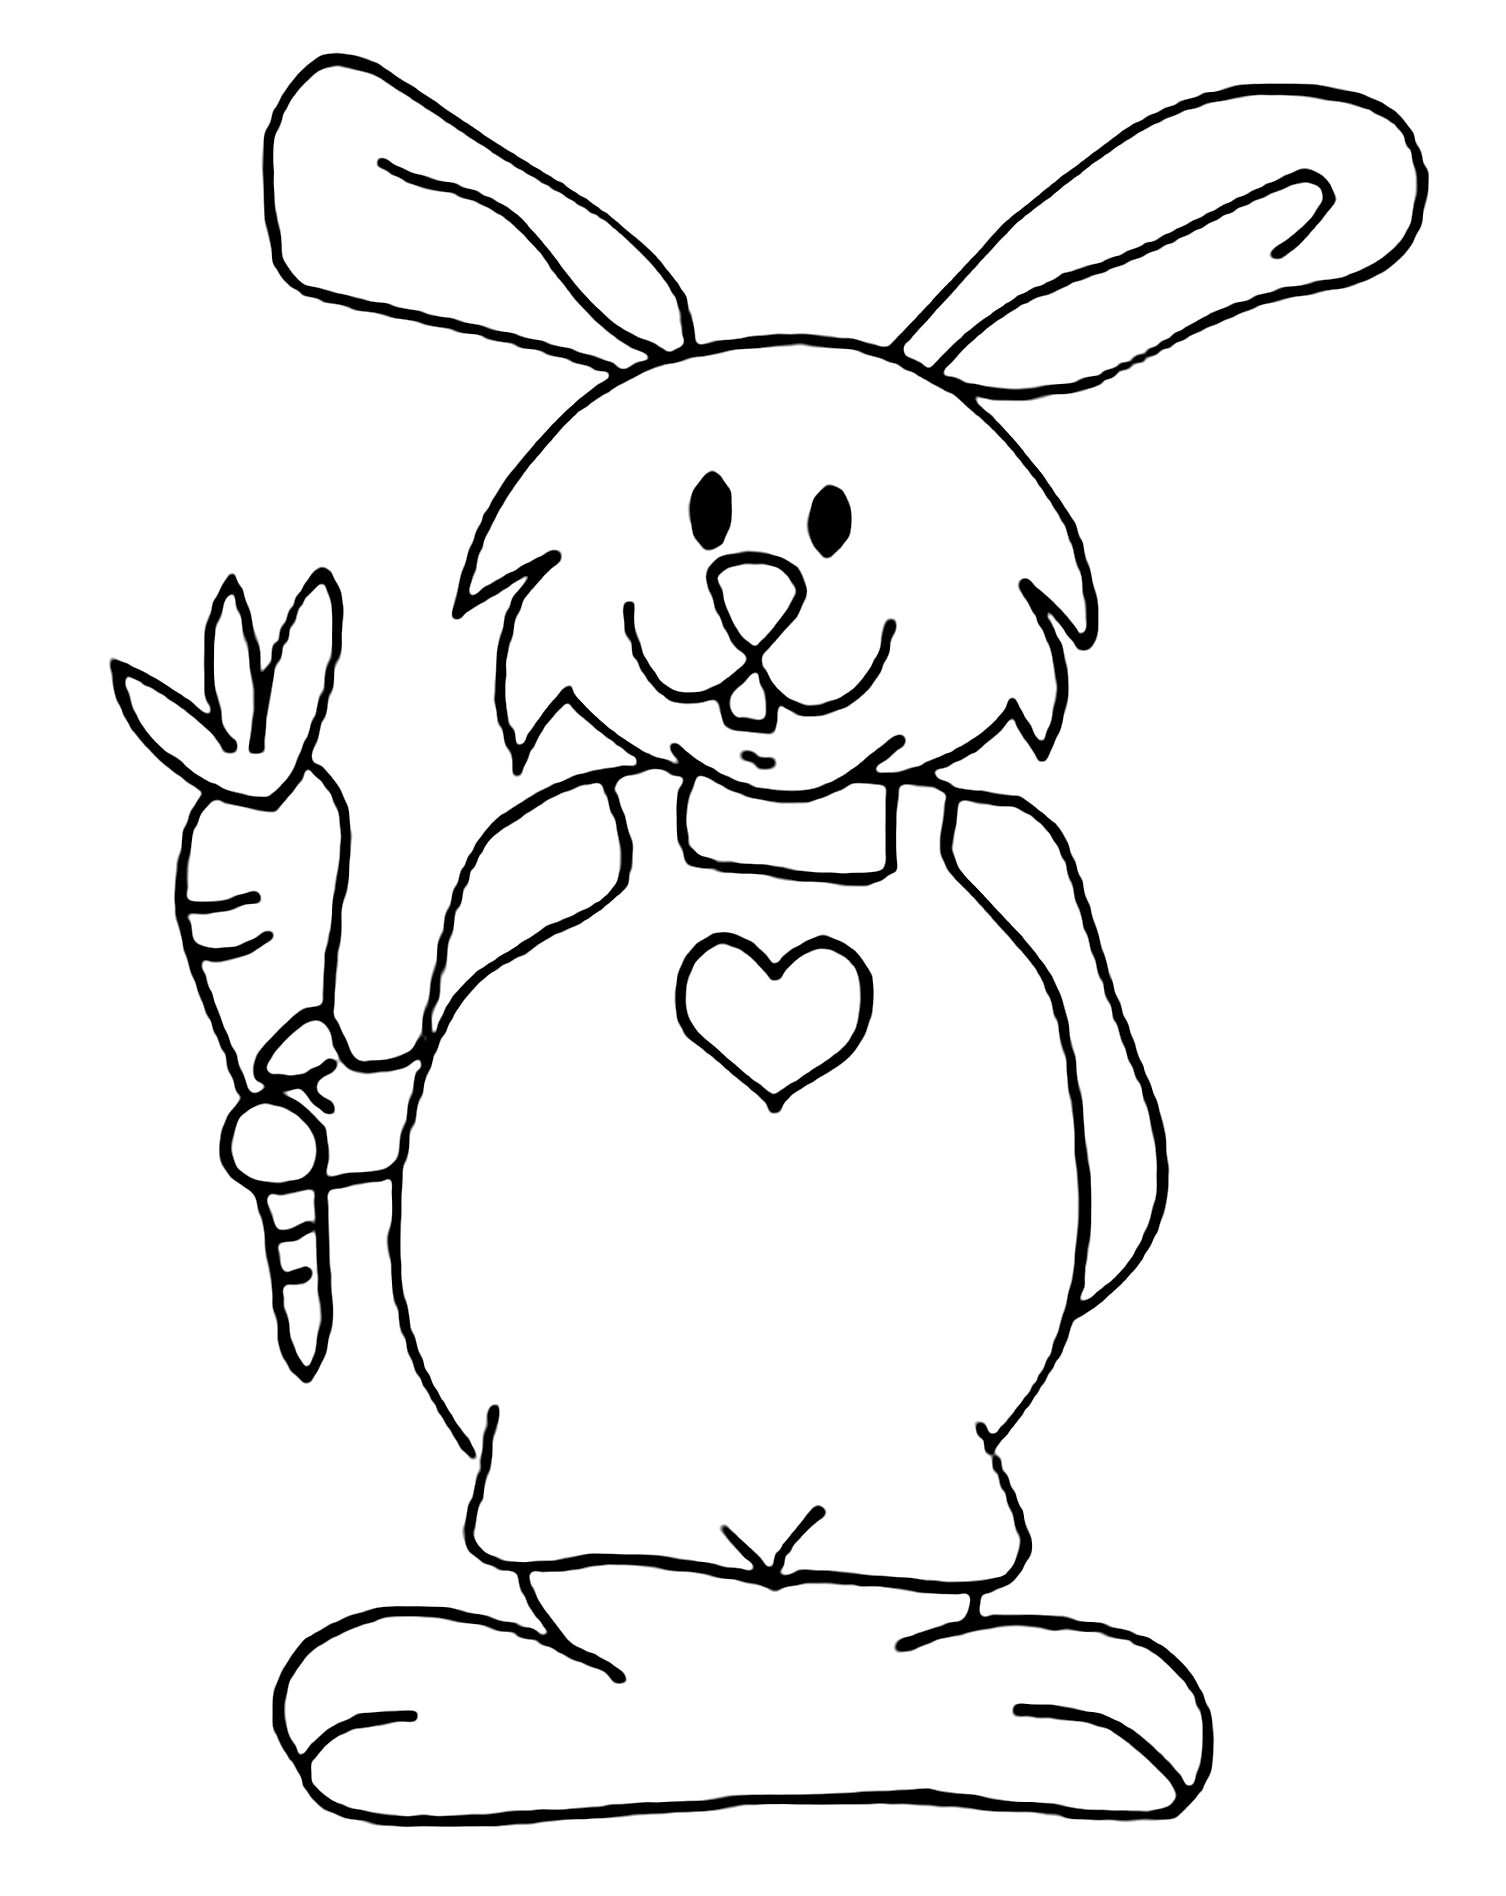 Color this beautiful rabbit coloring page with your favorite colors